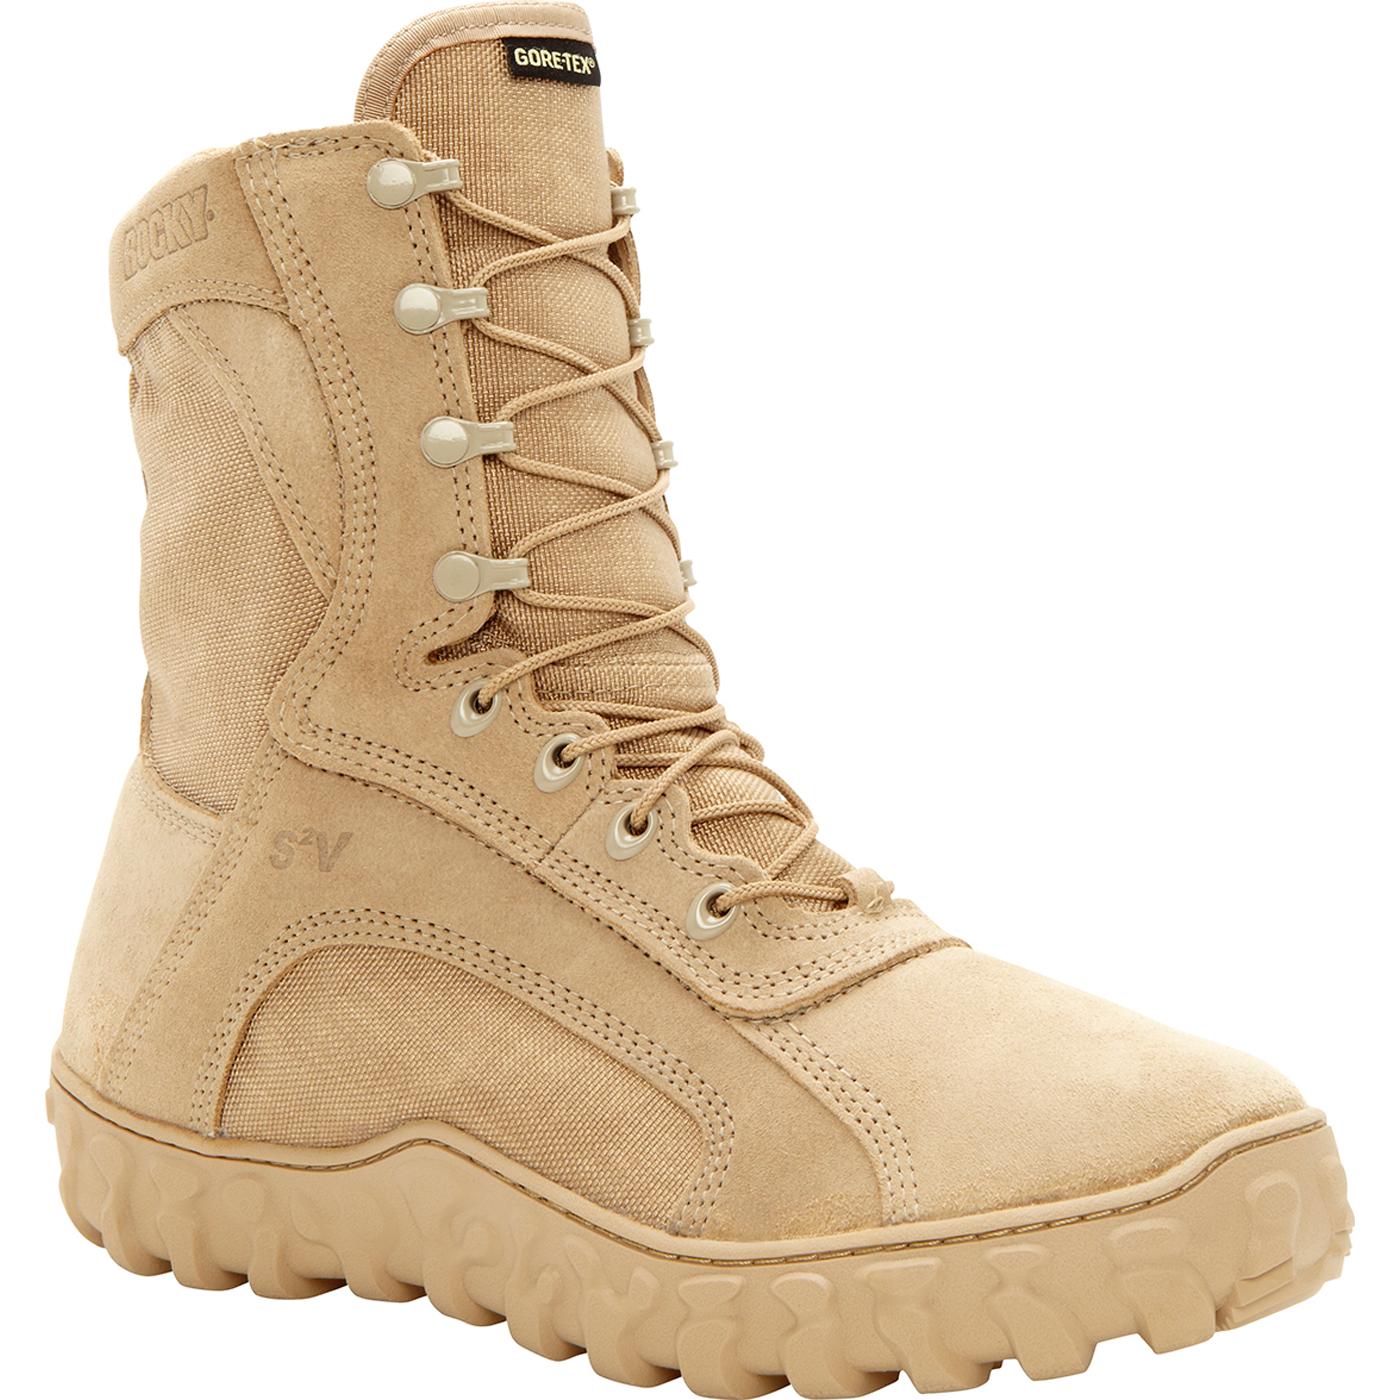 Rocky S2V: GORE-TEX Waterproof Insulated Military Boots